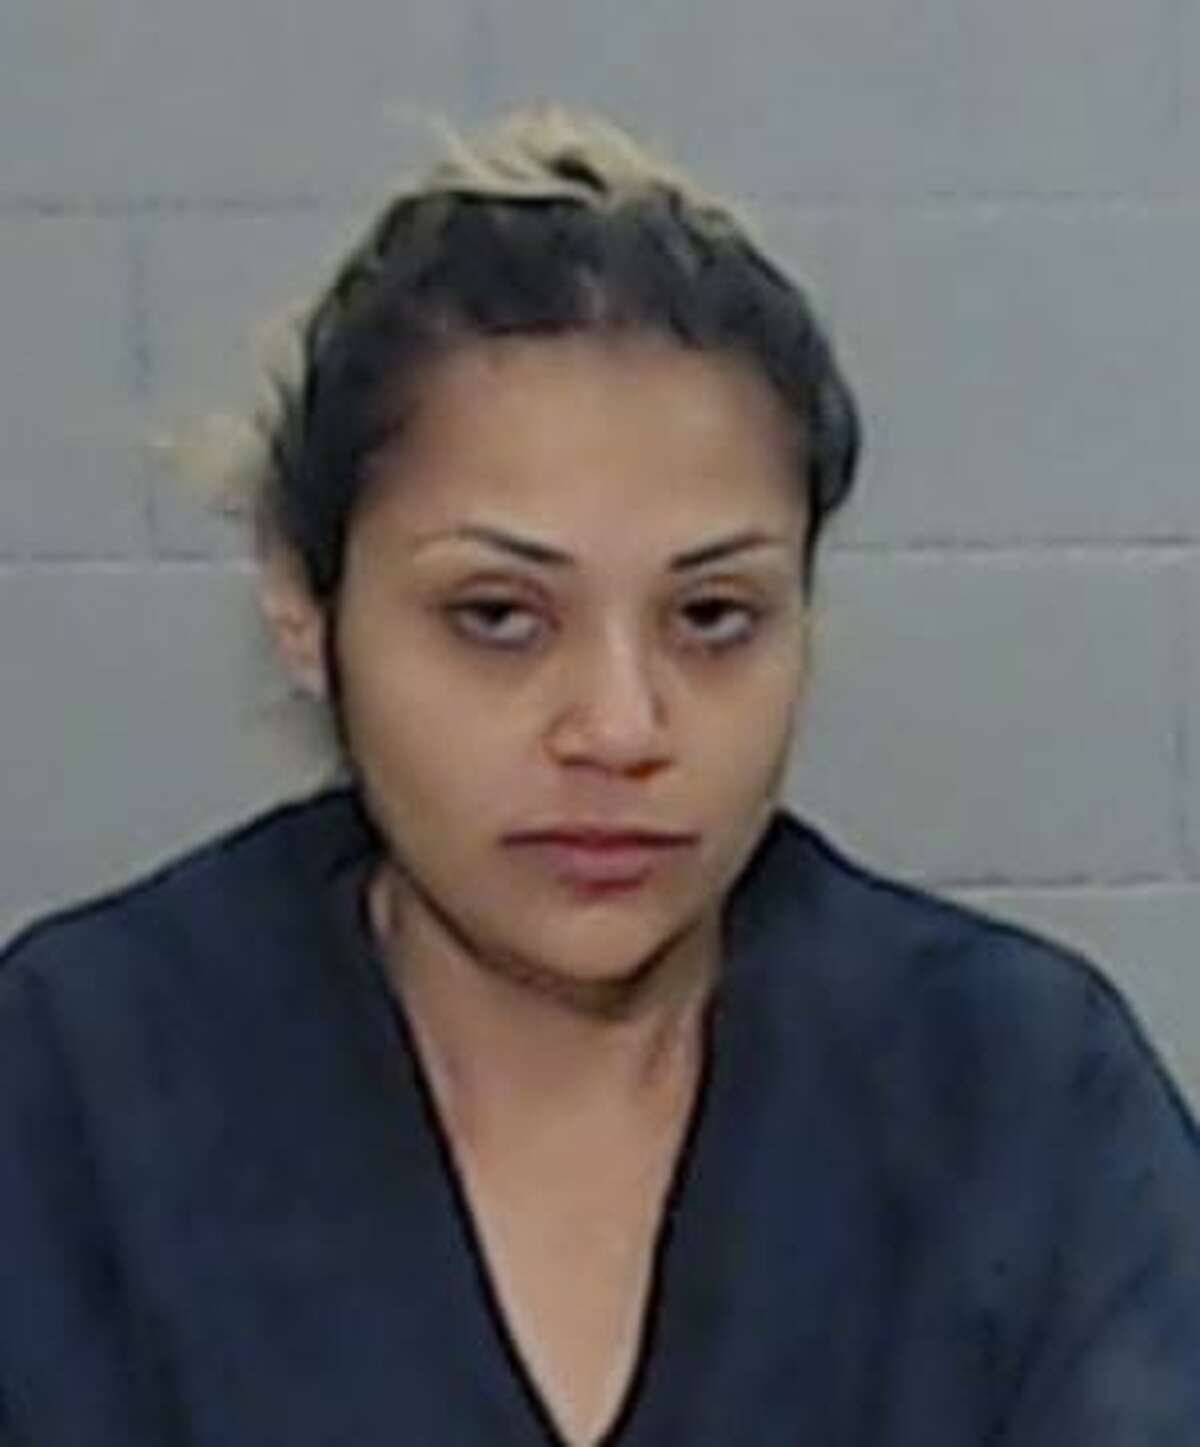 Nohemi Lozano Medina, 34, accused of biting an Odessa police officer was arrested Wednesday, according to a press release from Odessa Police Department.